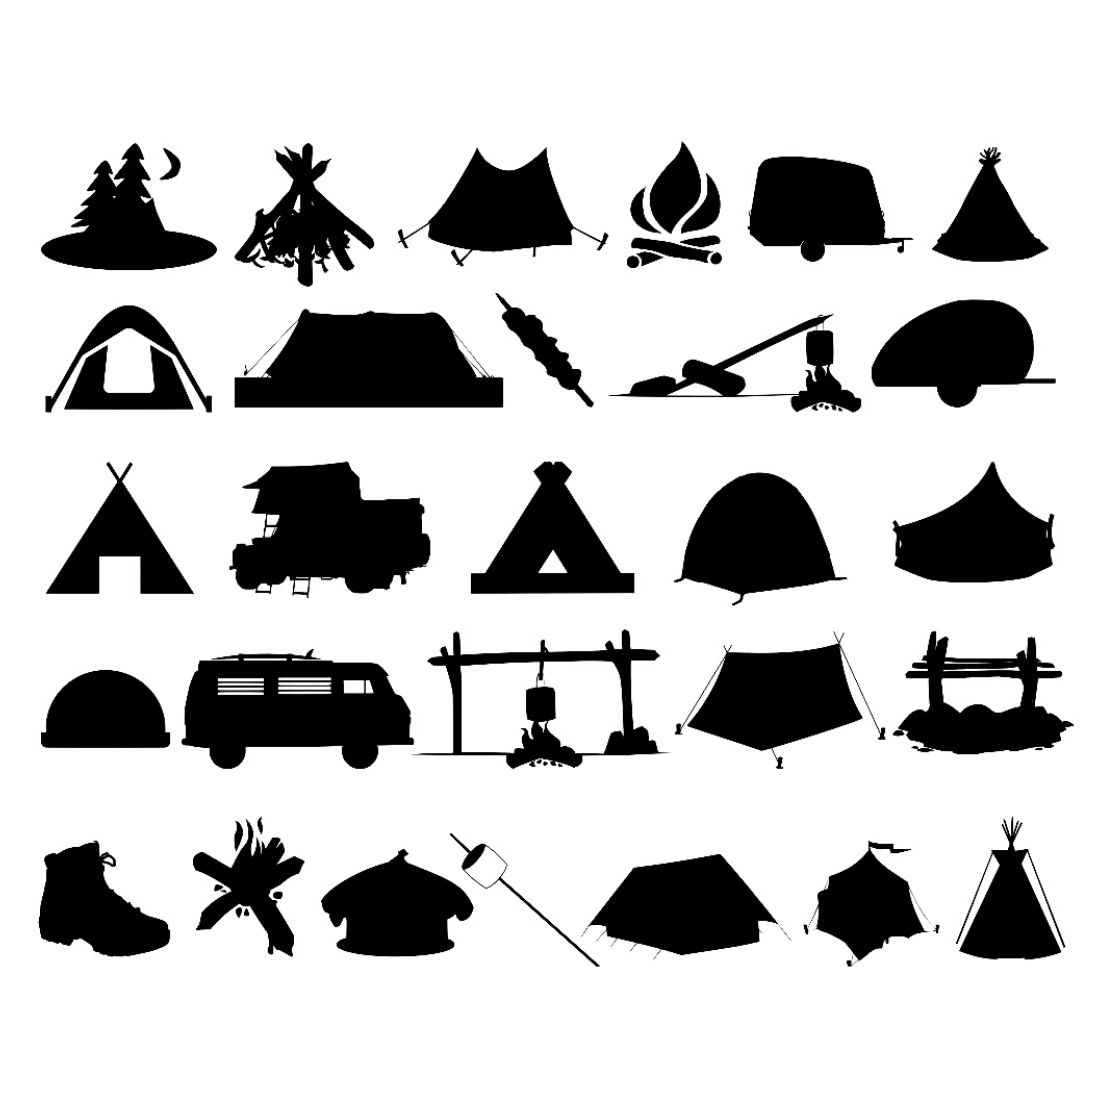 Camping Silhouette Bundle cover image.